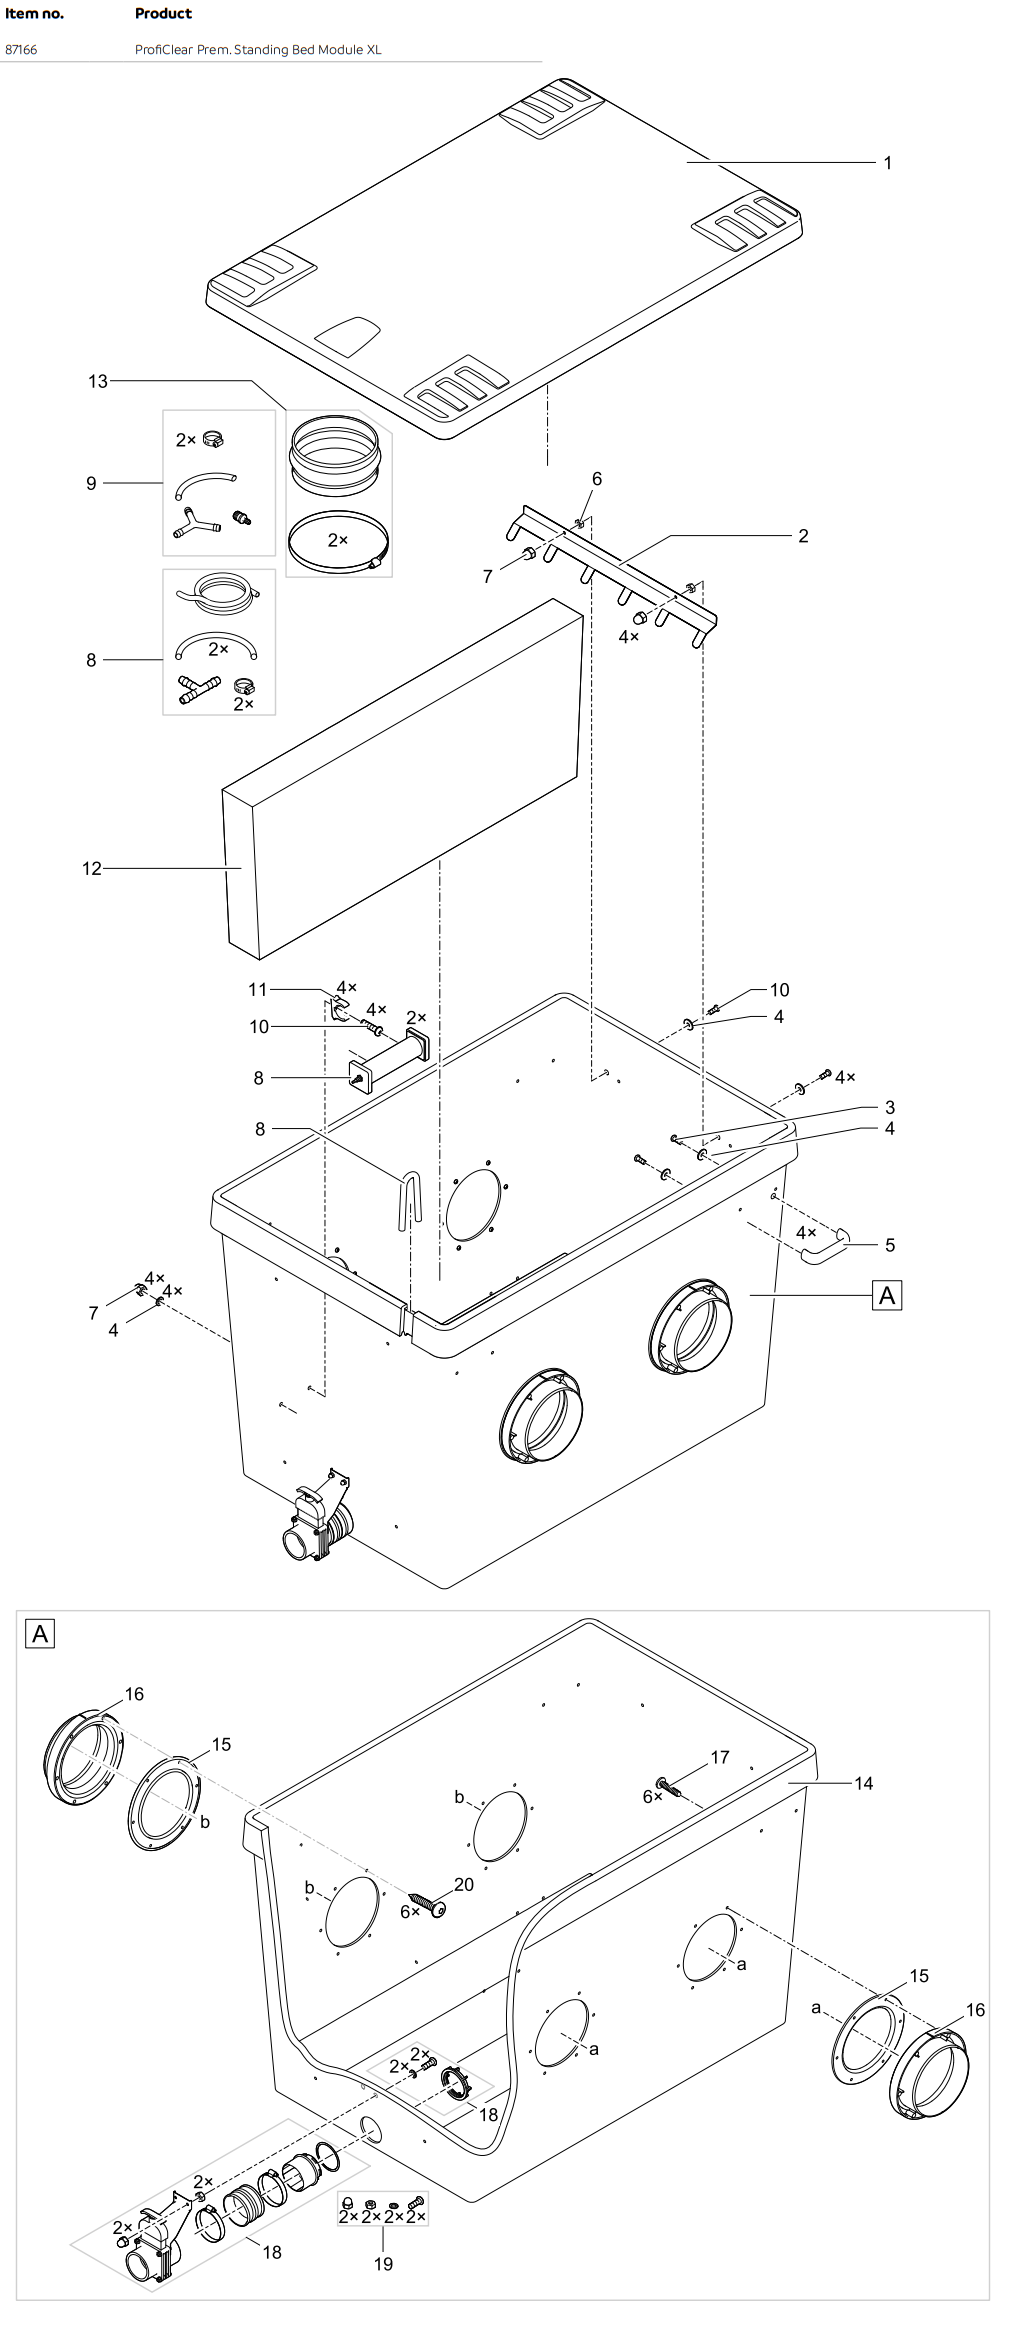 Standing Bed Module XL Exploded Diagram